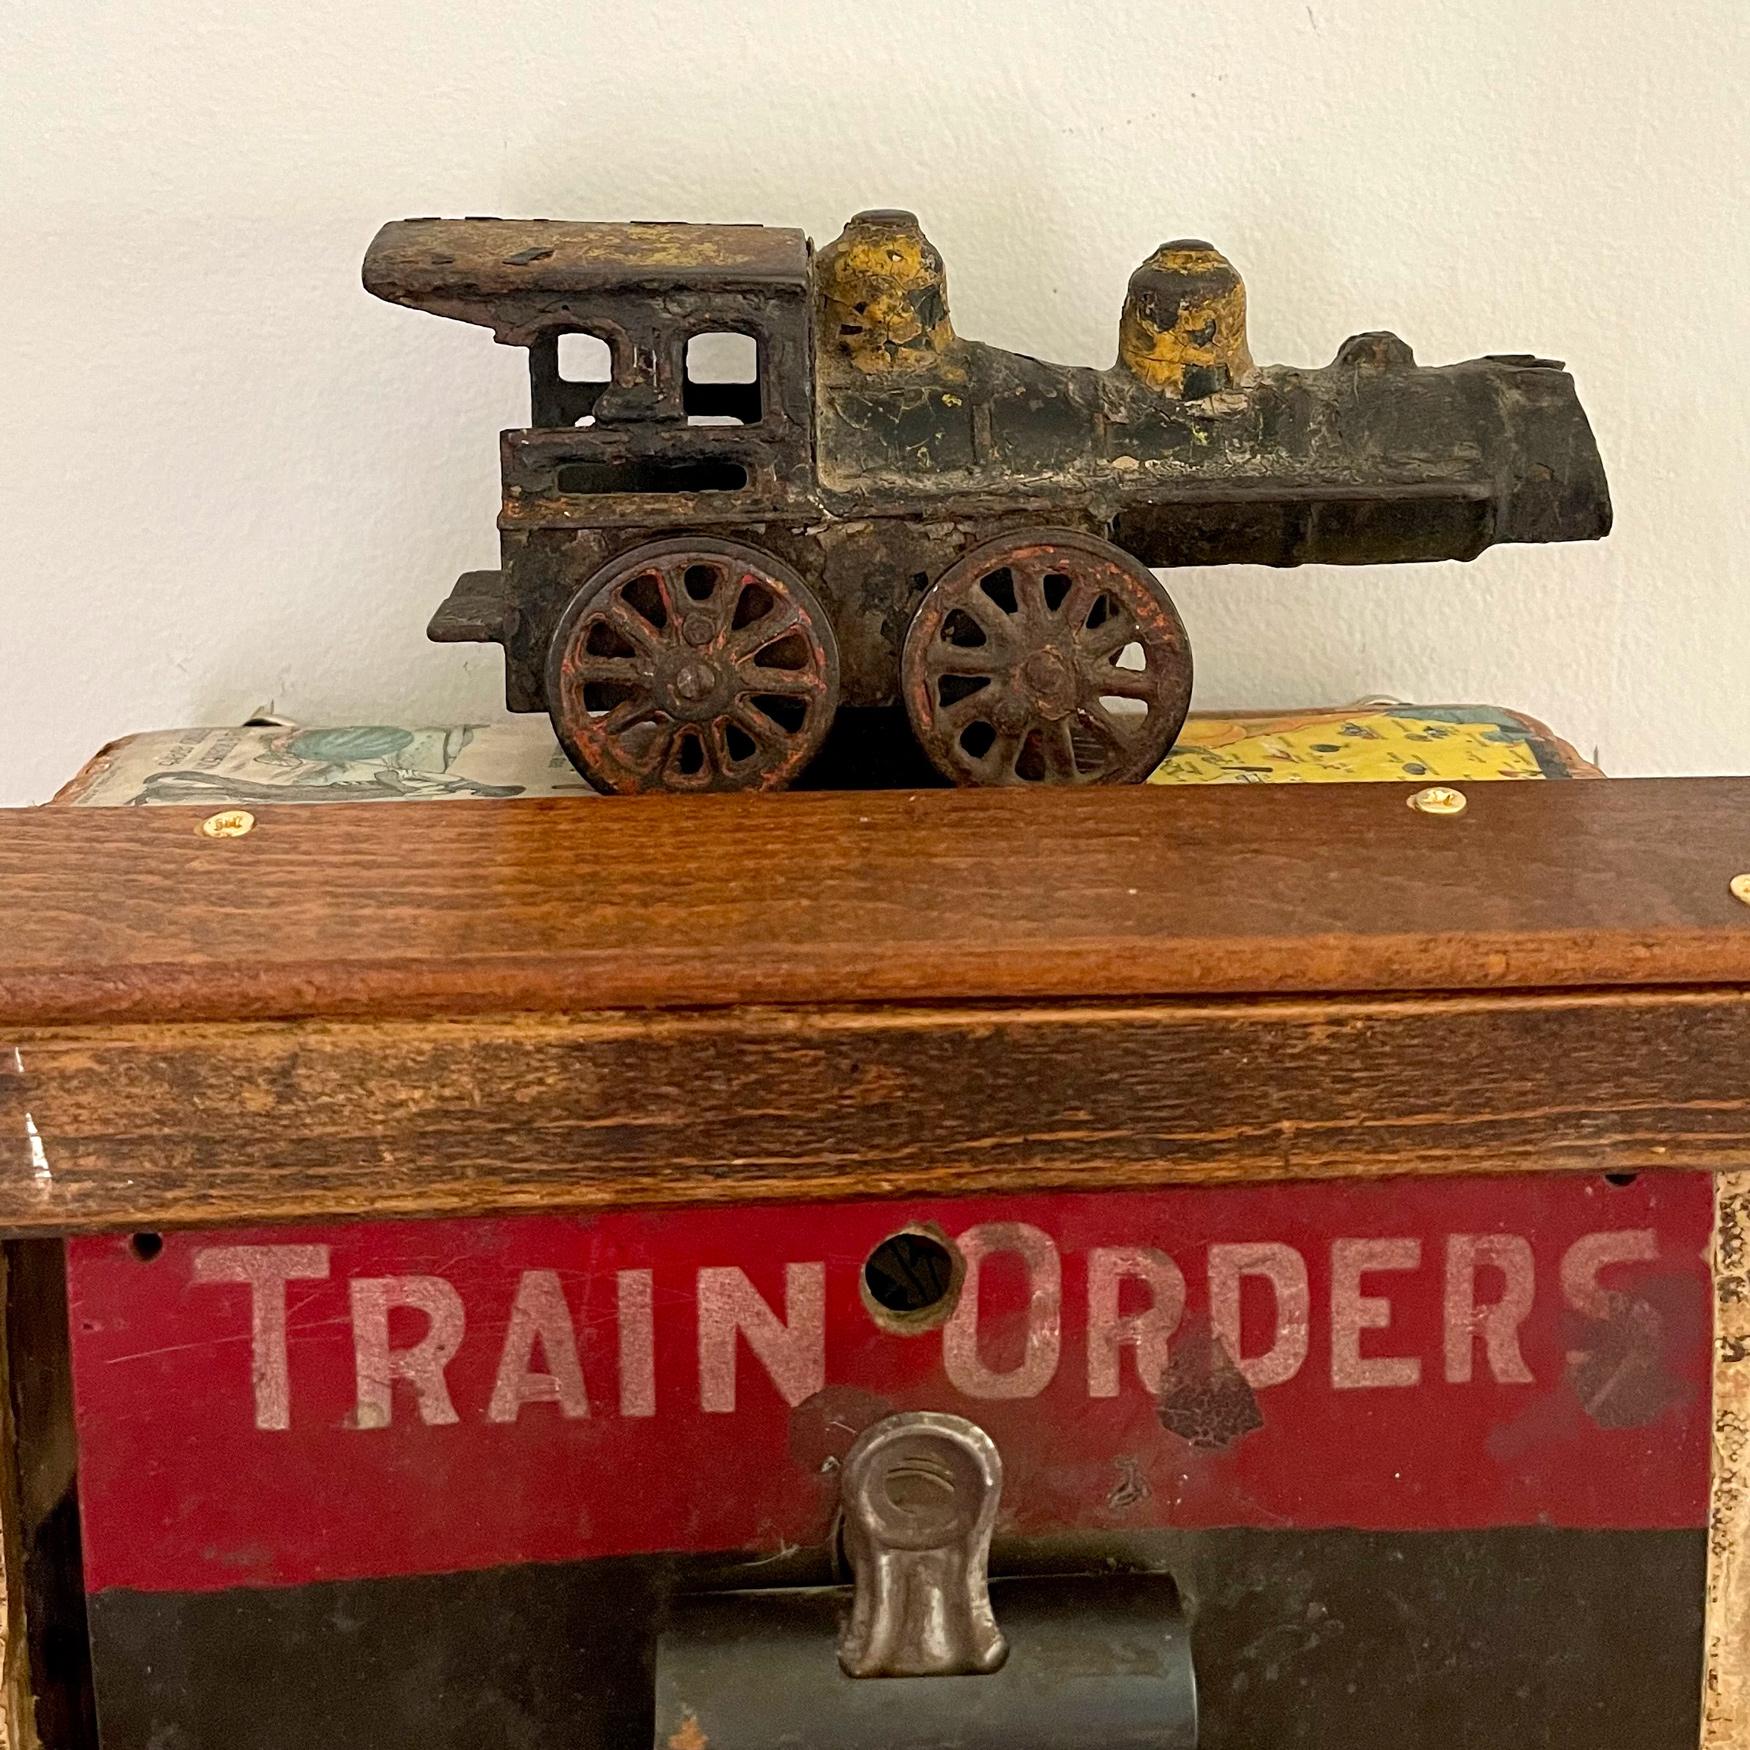 All Aboard - Contemporary Sculpture by Kat Flyn